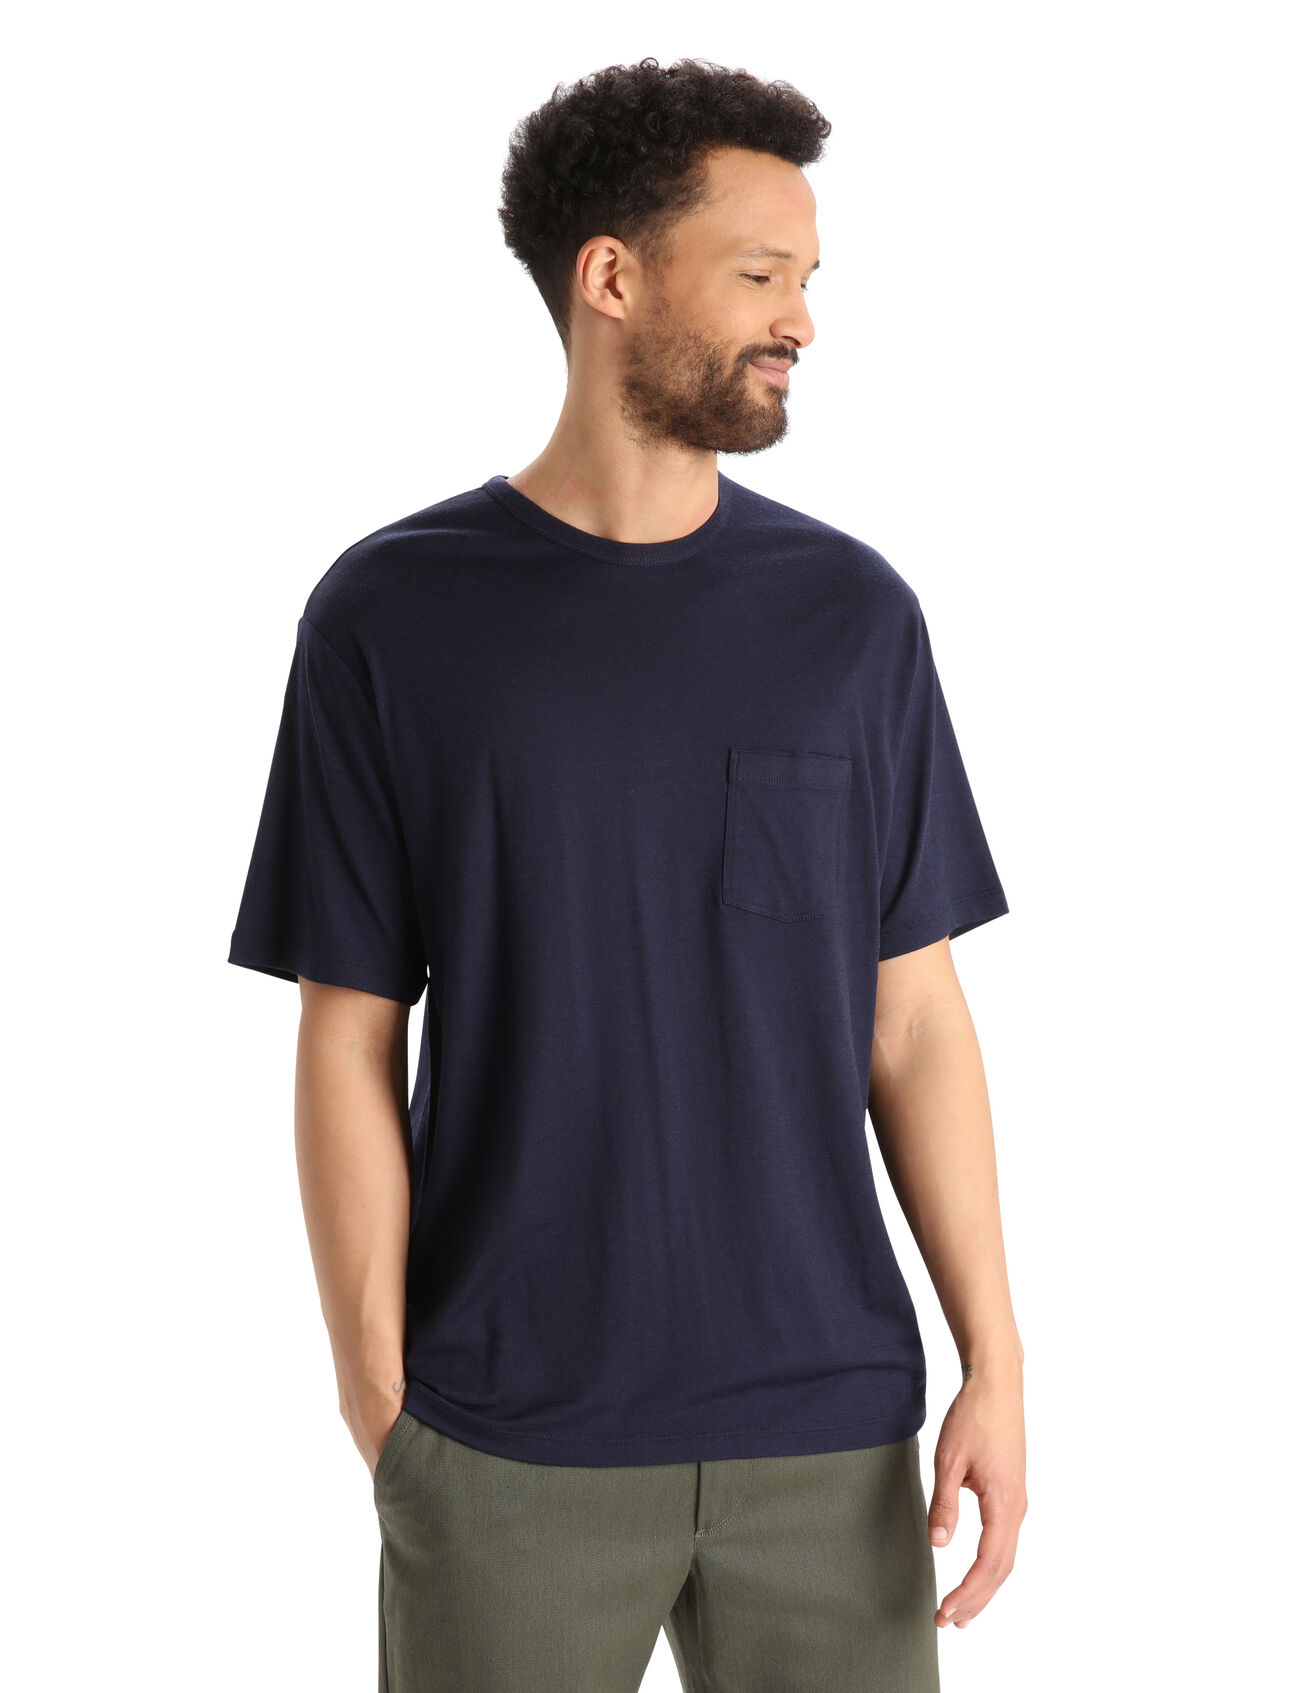 para hombre Merino Granary Short Sleeve Pocket T-Shirt A classic pocket tee with a relaxed fit and soft, breathable, 100% merino wool fabric, the Granary Short Sleeve Pocket Tee is all about everyday comfort and style.